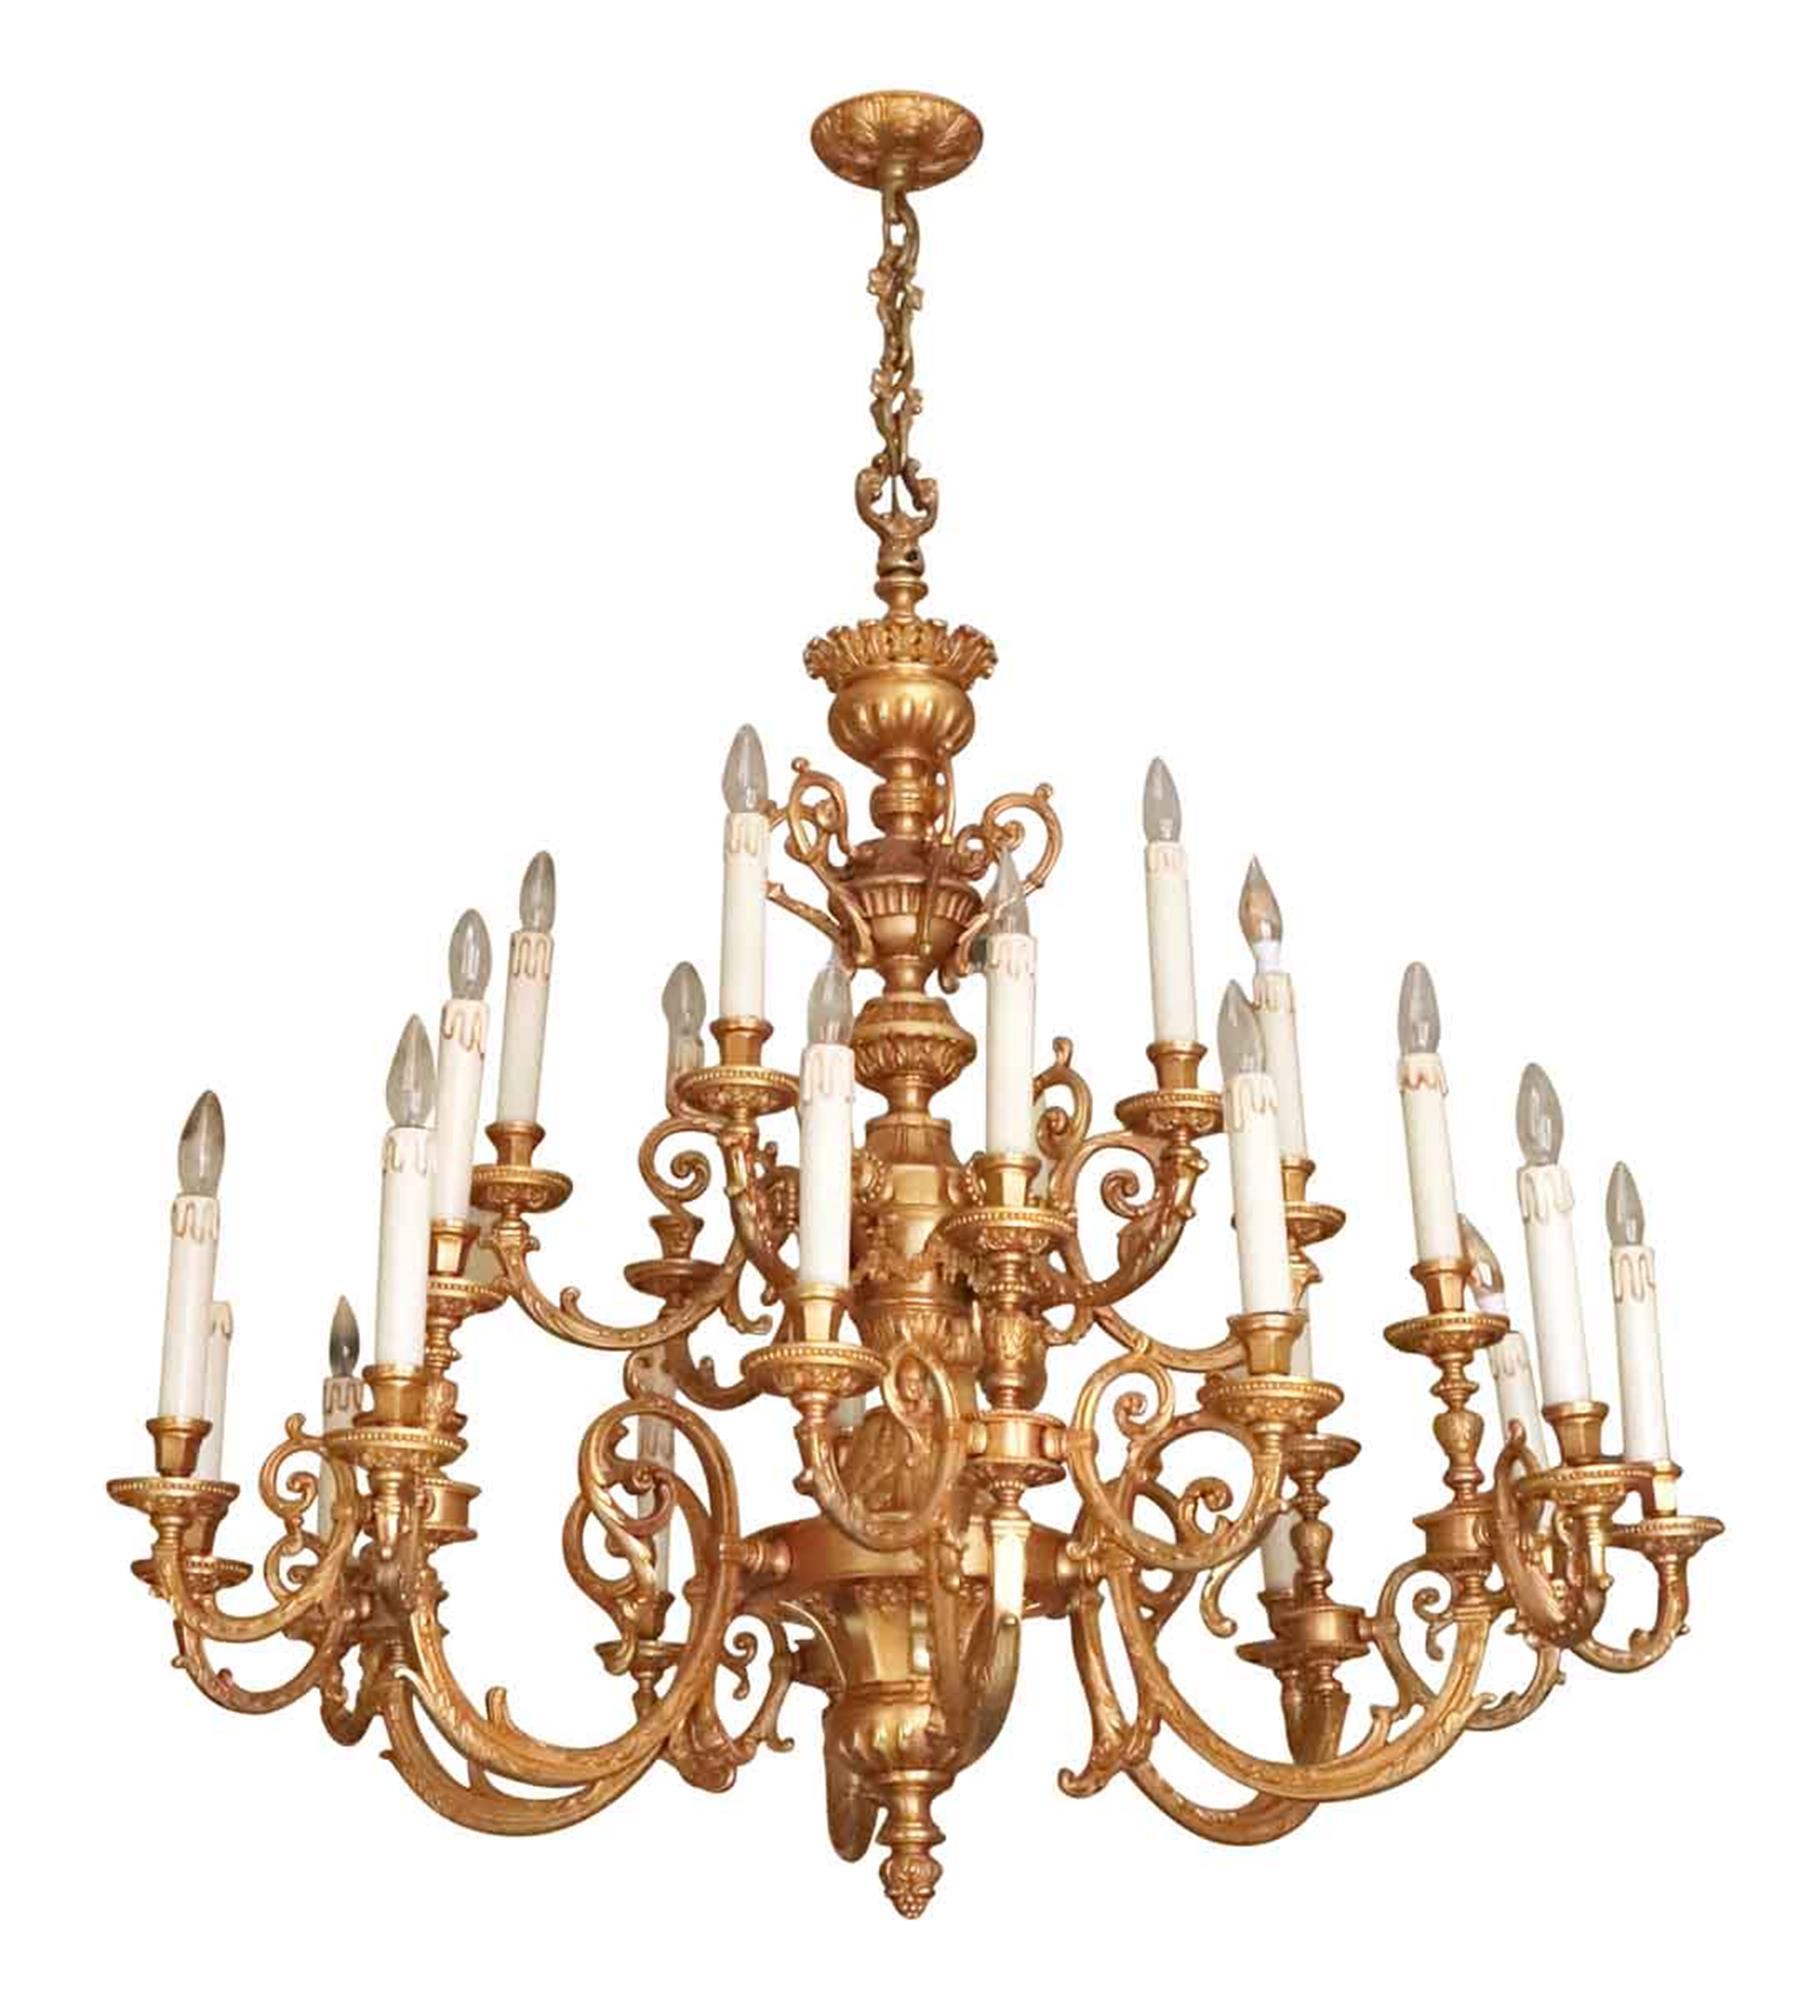 Large and elegant gold gilt over brass 24 arm chandelier. These are original to one of the 1980s NYC Waldorf Astoria Hotel banquet rooms on the 18th floor. A Waldorf Astoria authenticity card included with your purchase. This can be seen at our 2420